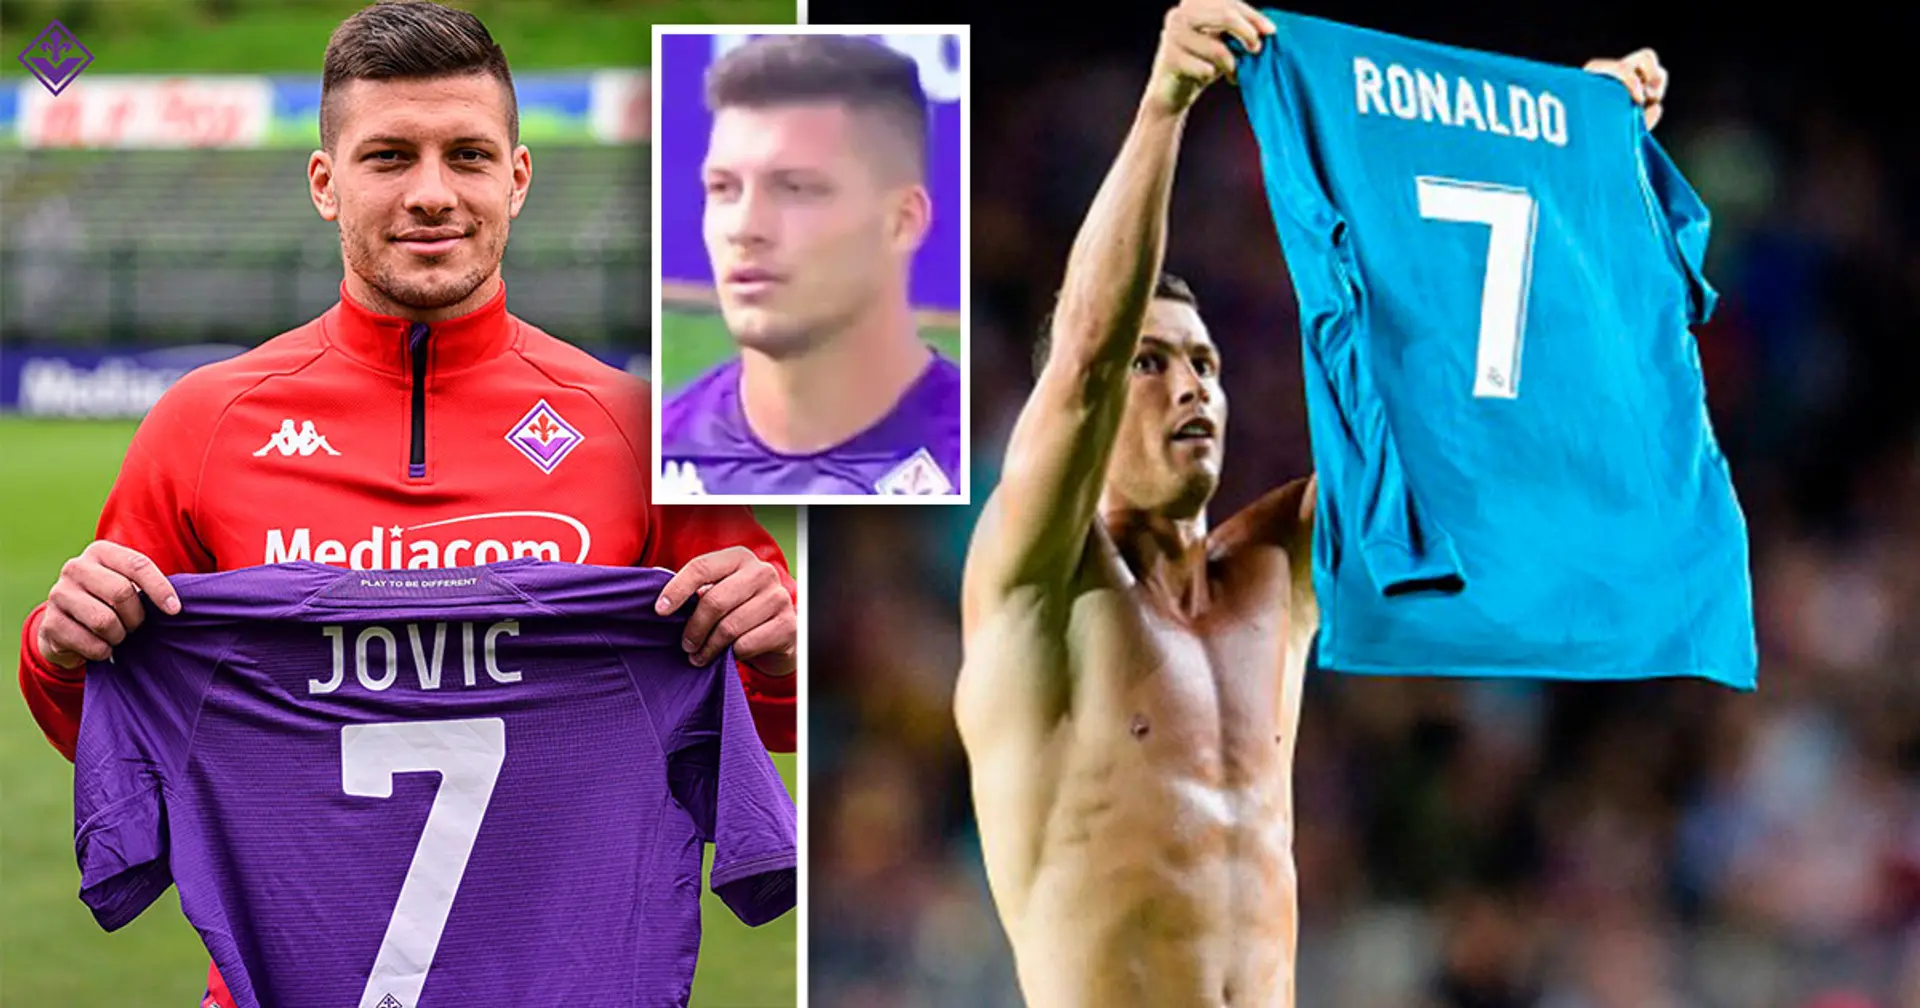 Jovic: I chose no. 7 at Fiorentina thanks to Ronaldo, the greatest player of all time